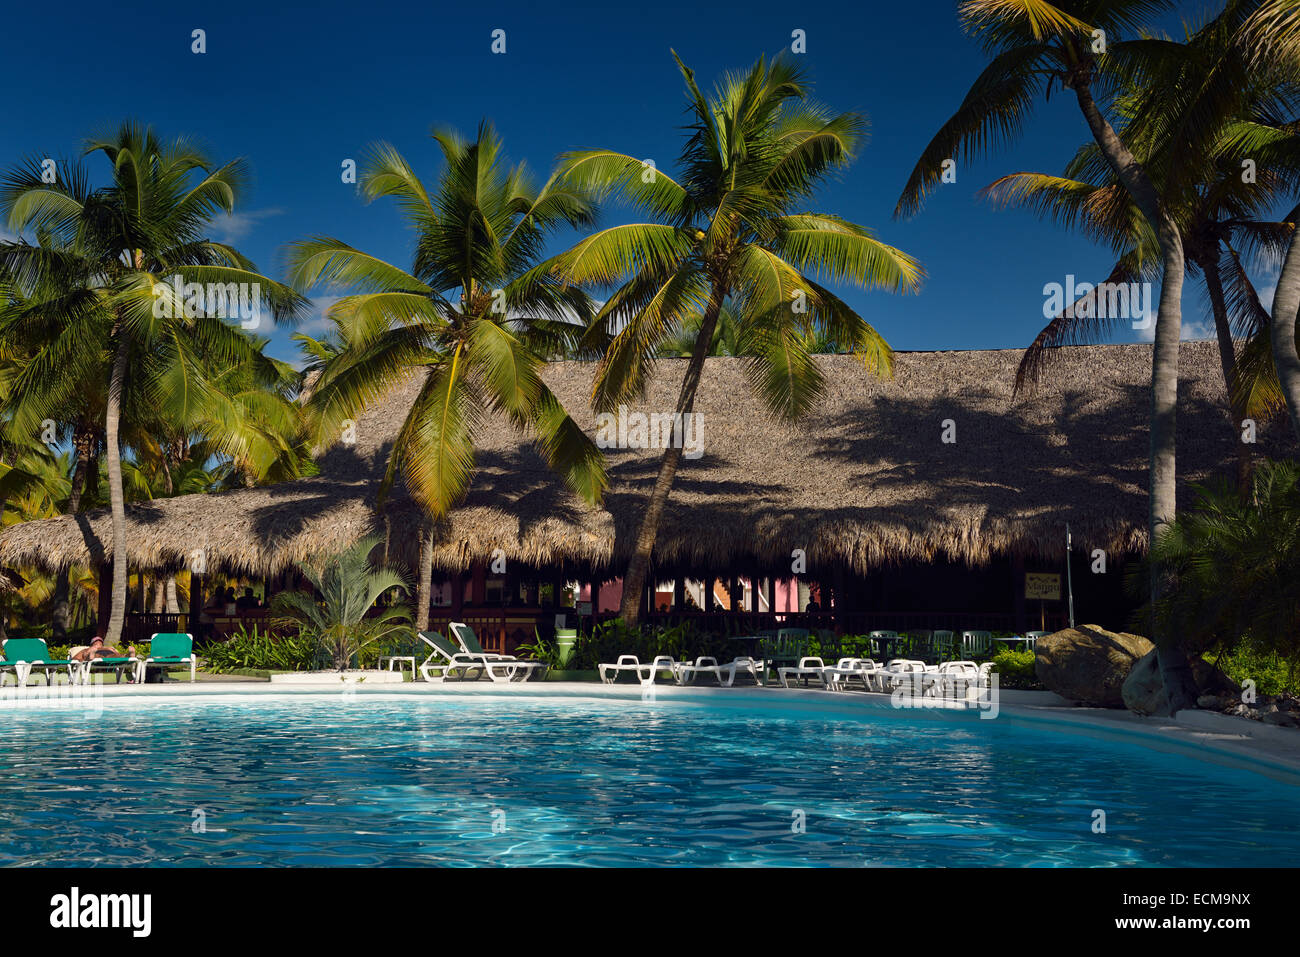 Pool and thatched roof bar with coconut palm trees at vacation resort in Puerto Plata Dominican Republic Stock Photo